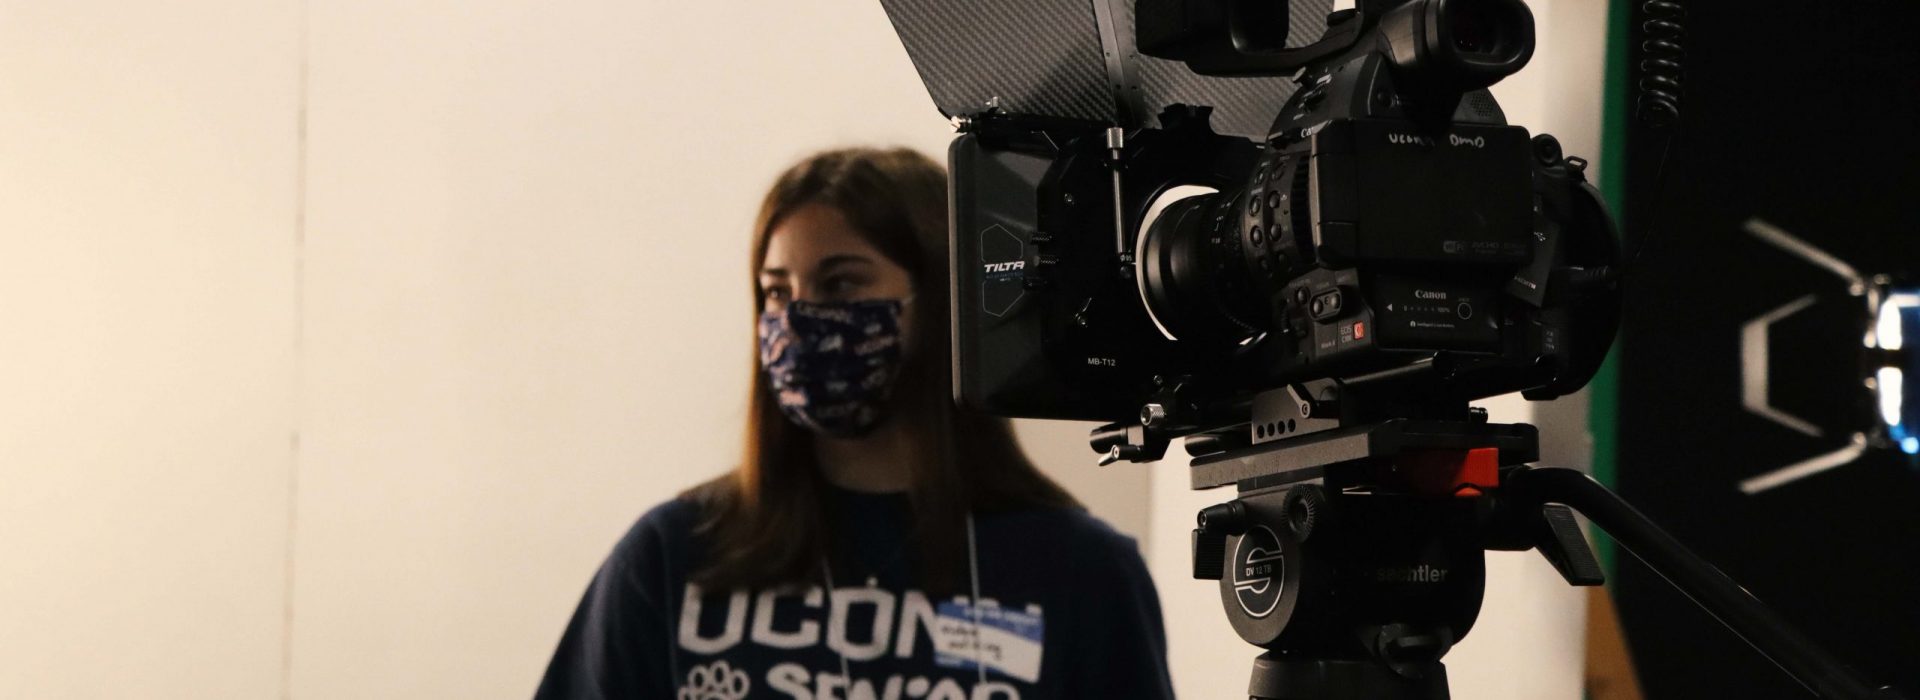 Video equipment and UConn Student wearing a UConn Senior shirt in the background